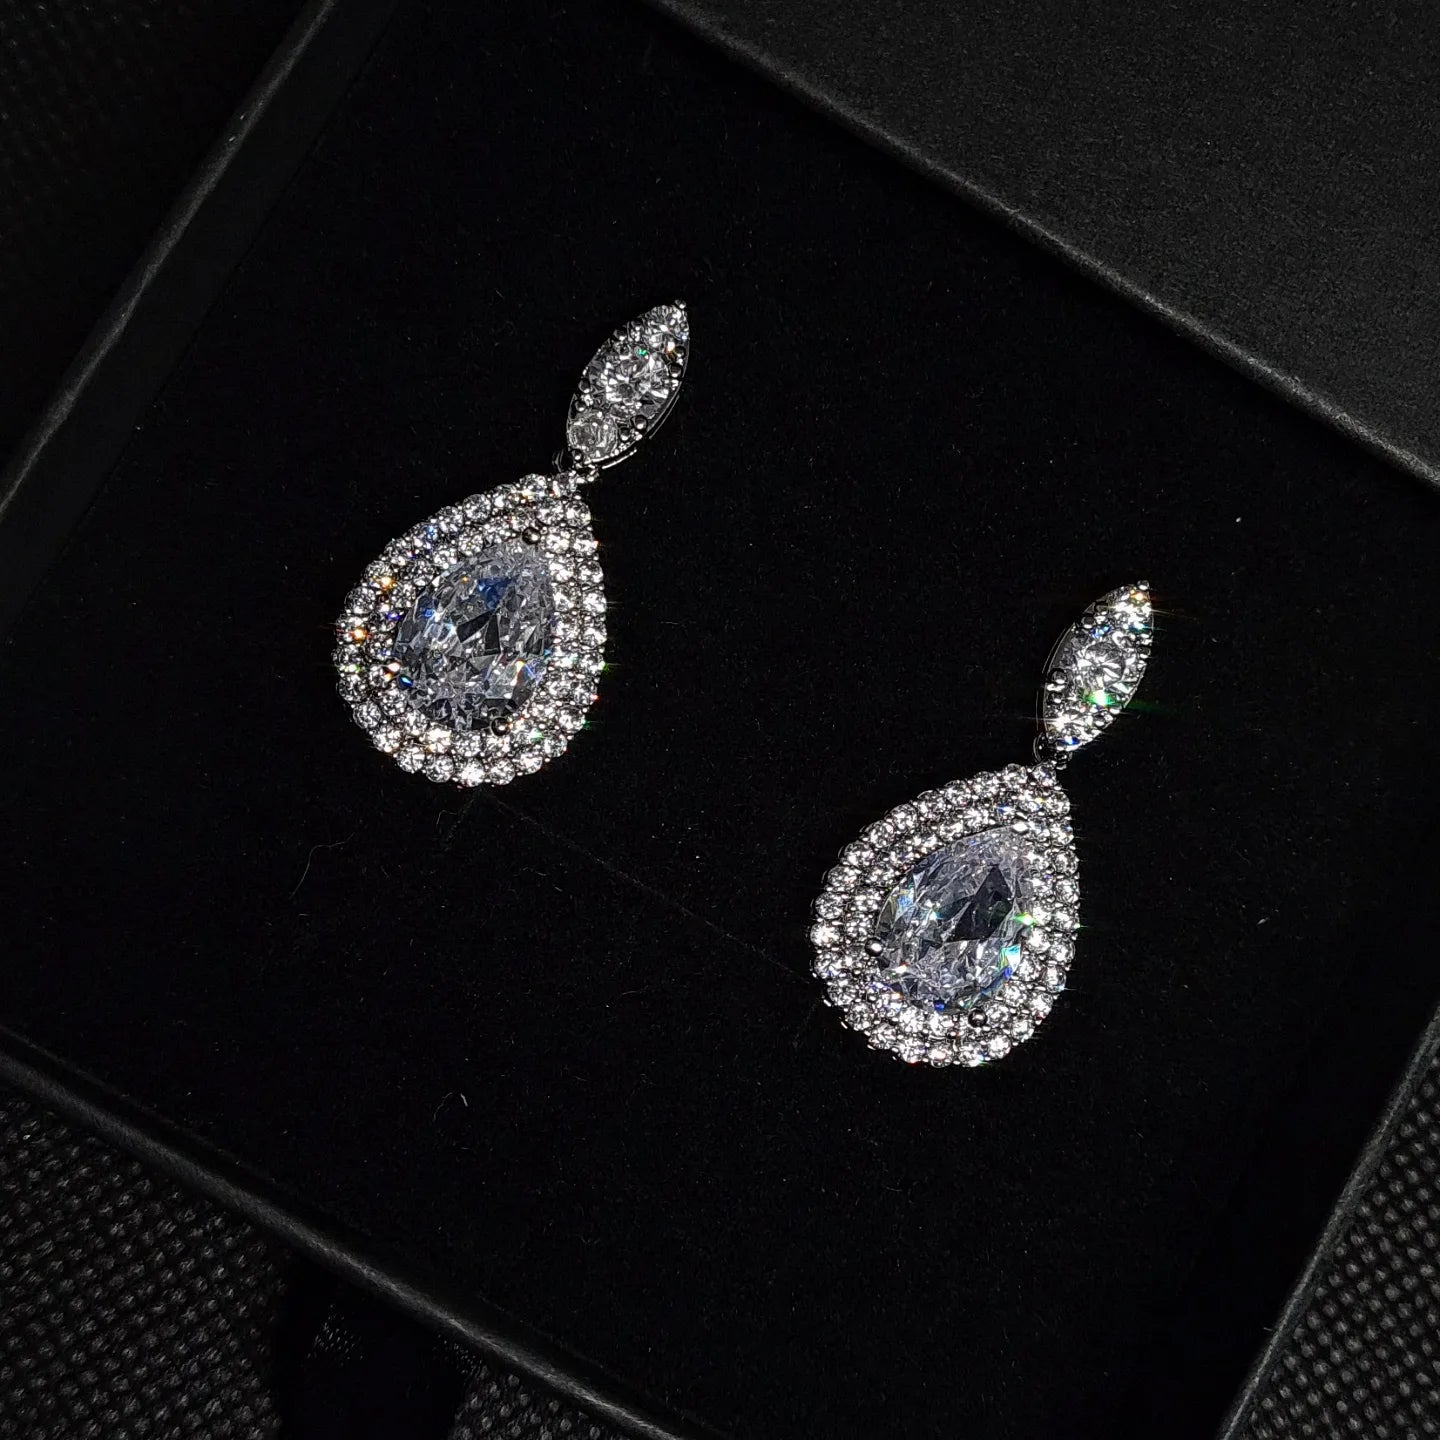 A pair of diamond earrings on a black background. The earrings are made of silver and are set with round cubic zirconia stones. The diamonds are arranged in a cluster and are surrounded by smaller diamonds. The earrings are suspended from a black ear wire. The earrings are elegant and sophisticated, and they would be a perfect addition to any formal outfit.